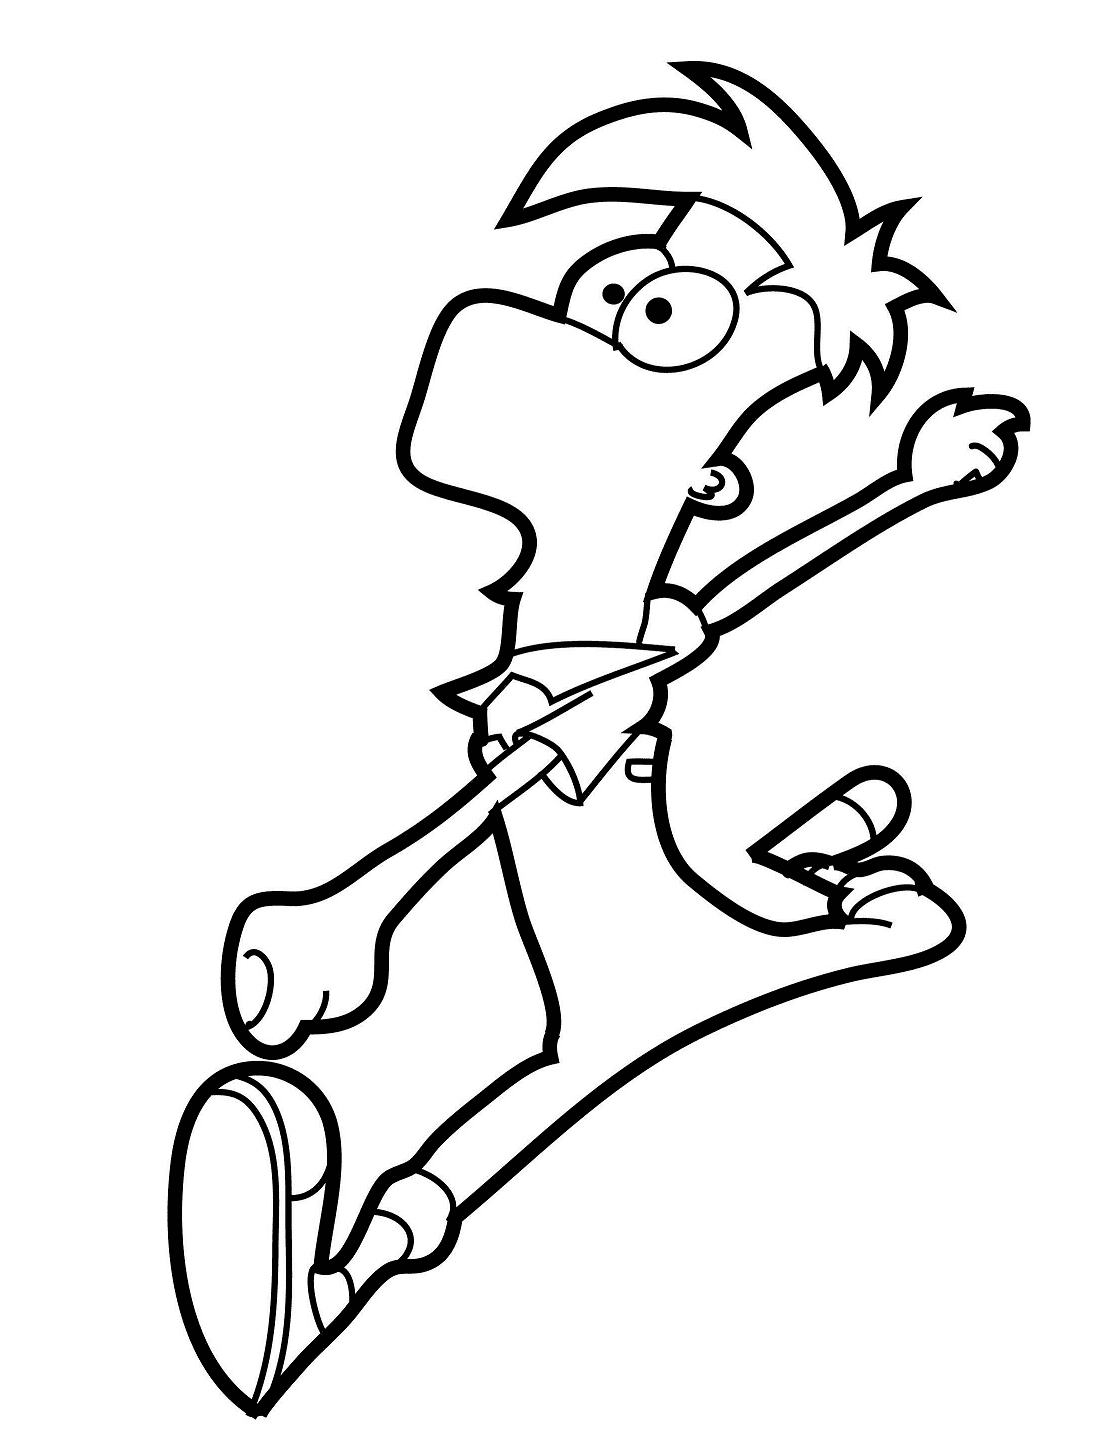 Ferb Running Coloring Pages